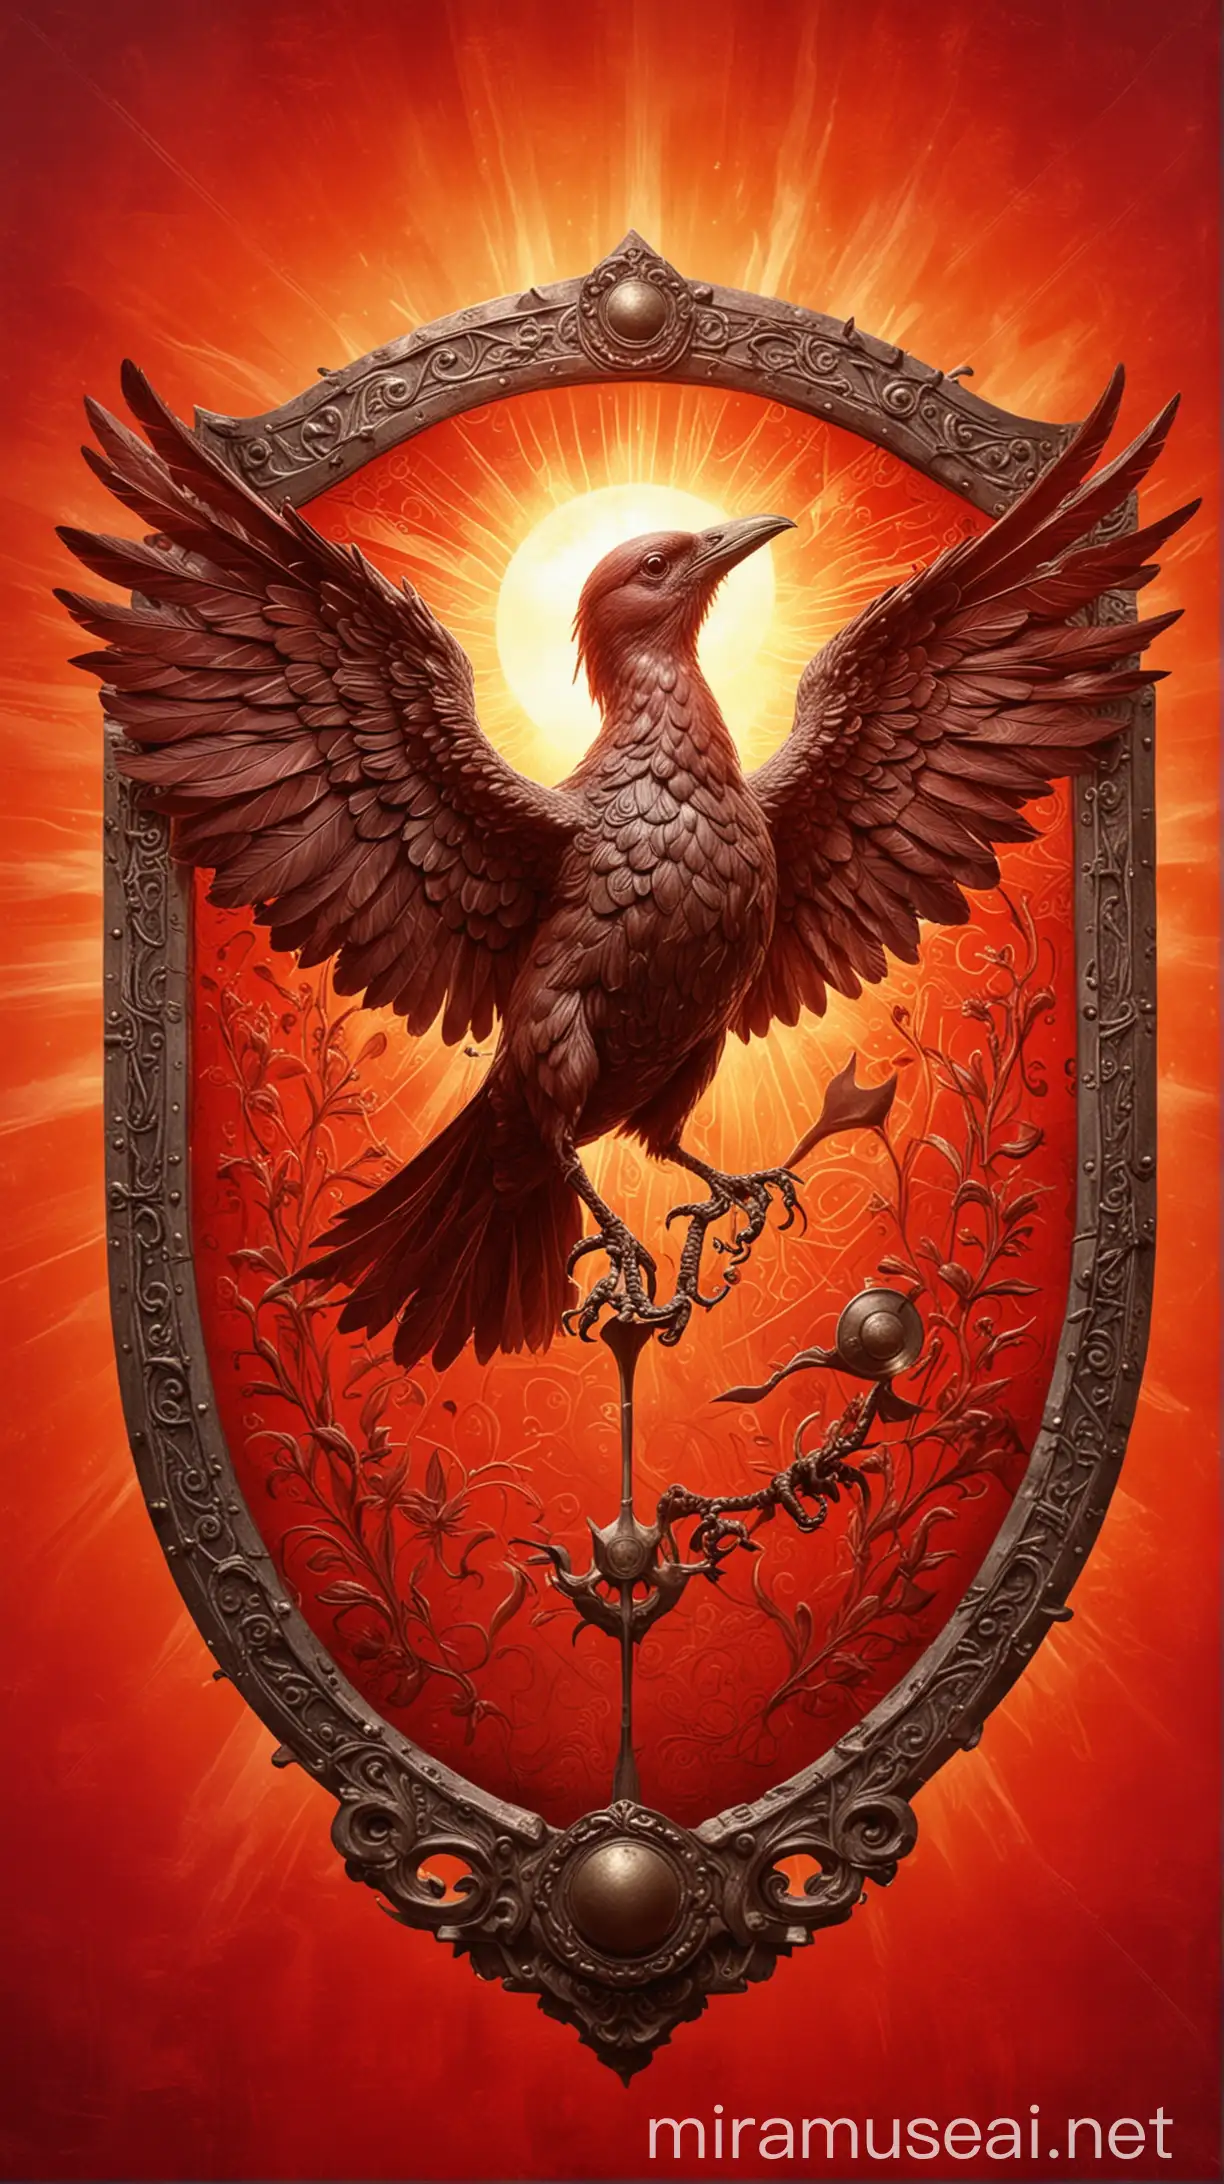 shield with a mystical bird on a scarlet background of the sun